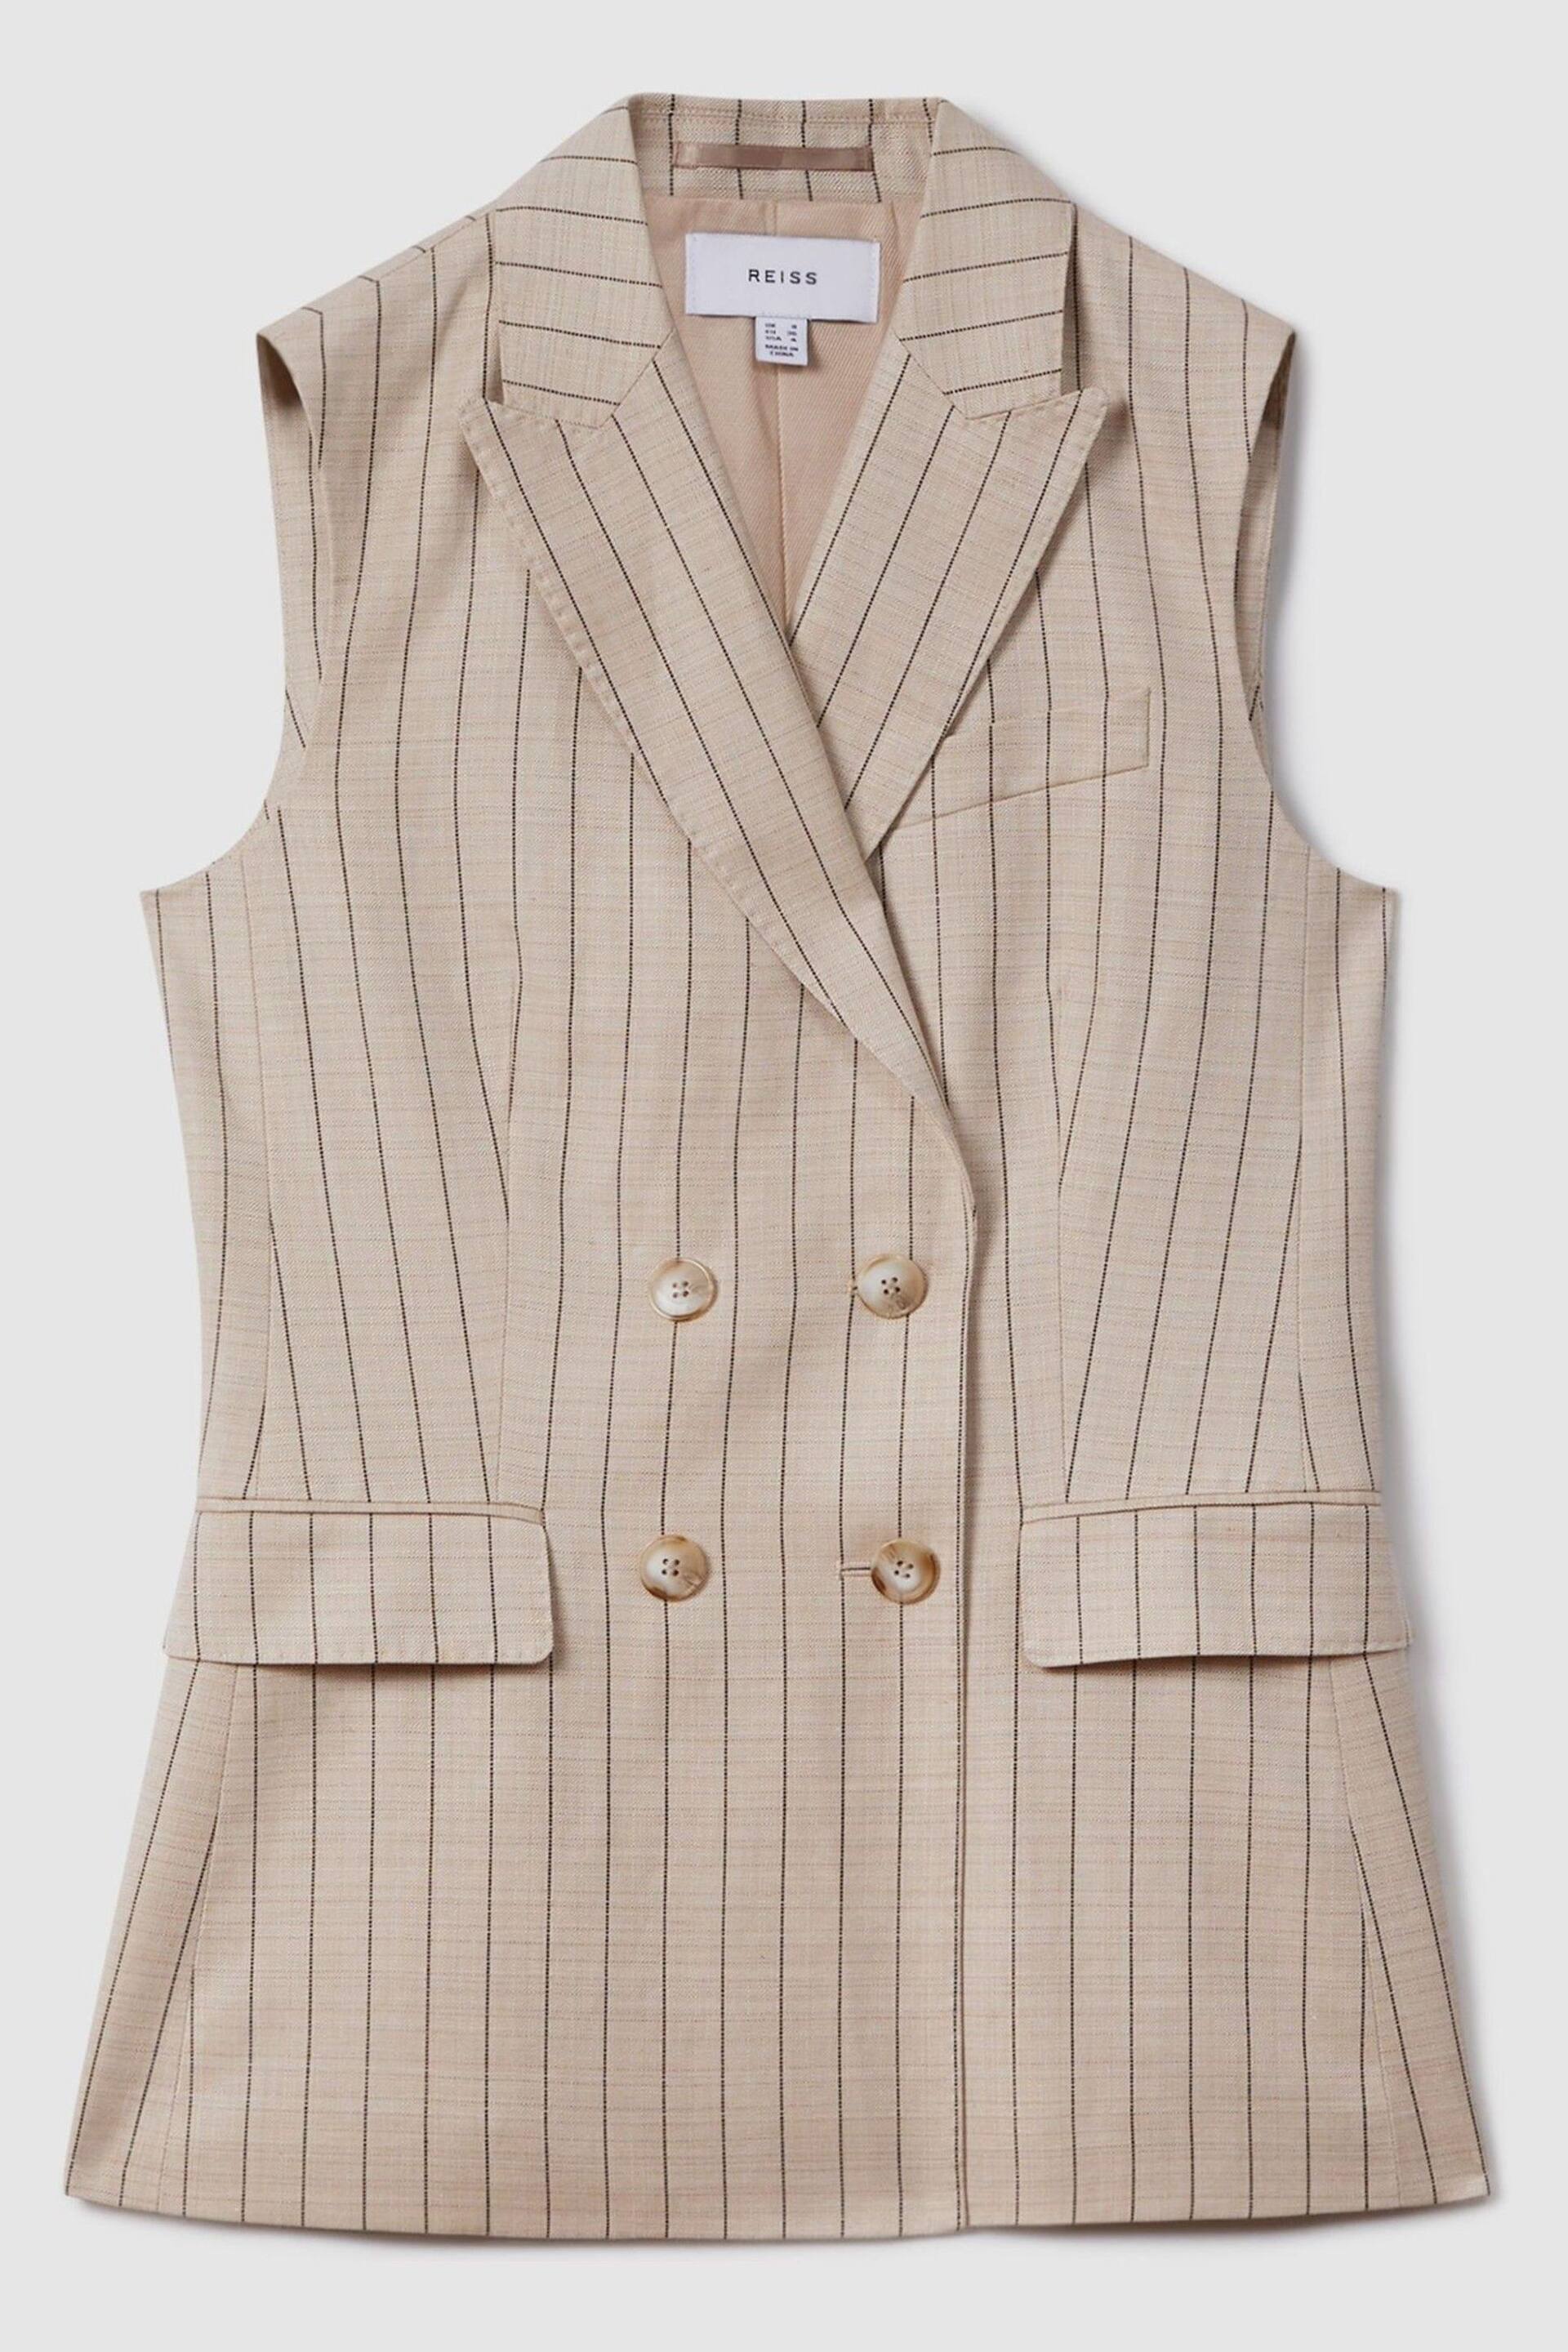 Reiss Neutral Odette Petite Wool Blend Striped Double Breasted Waistcoat - Image 2 of 7